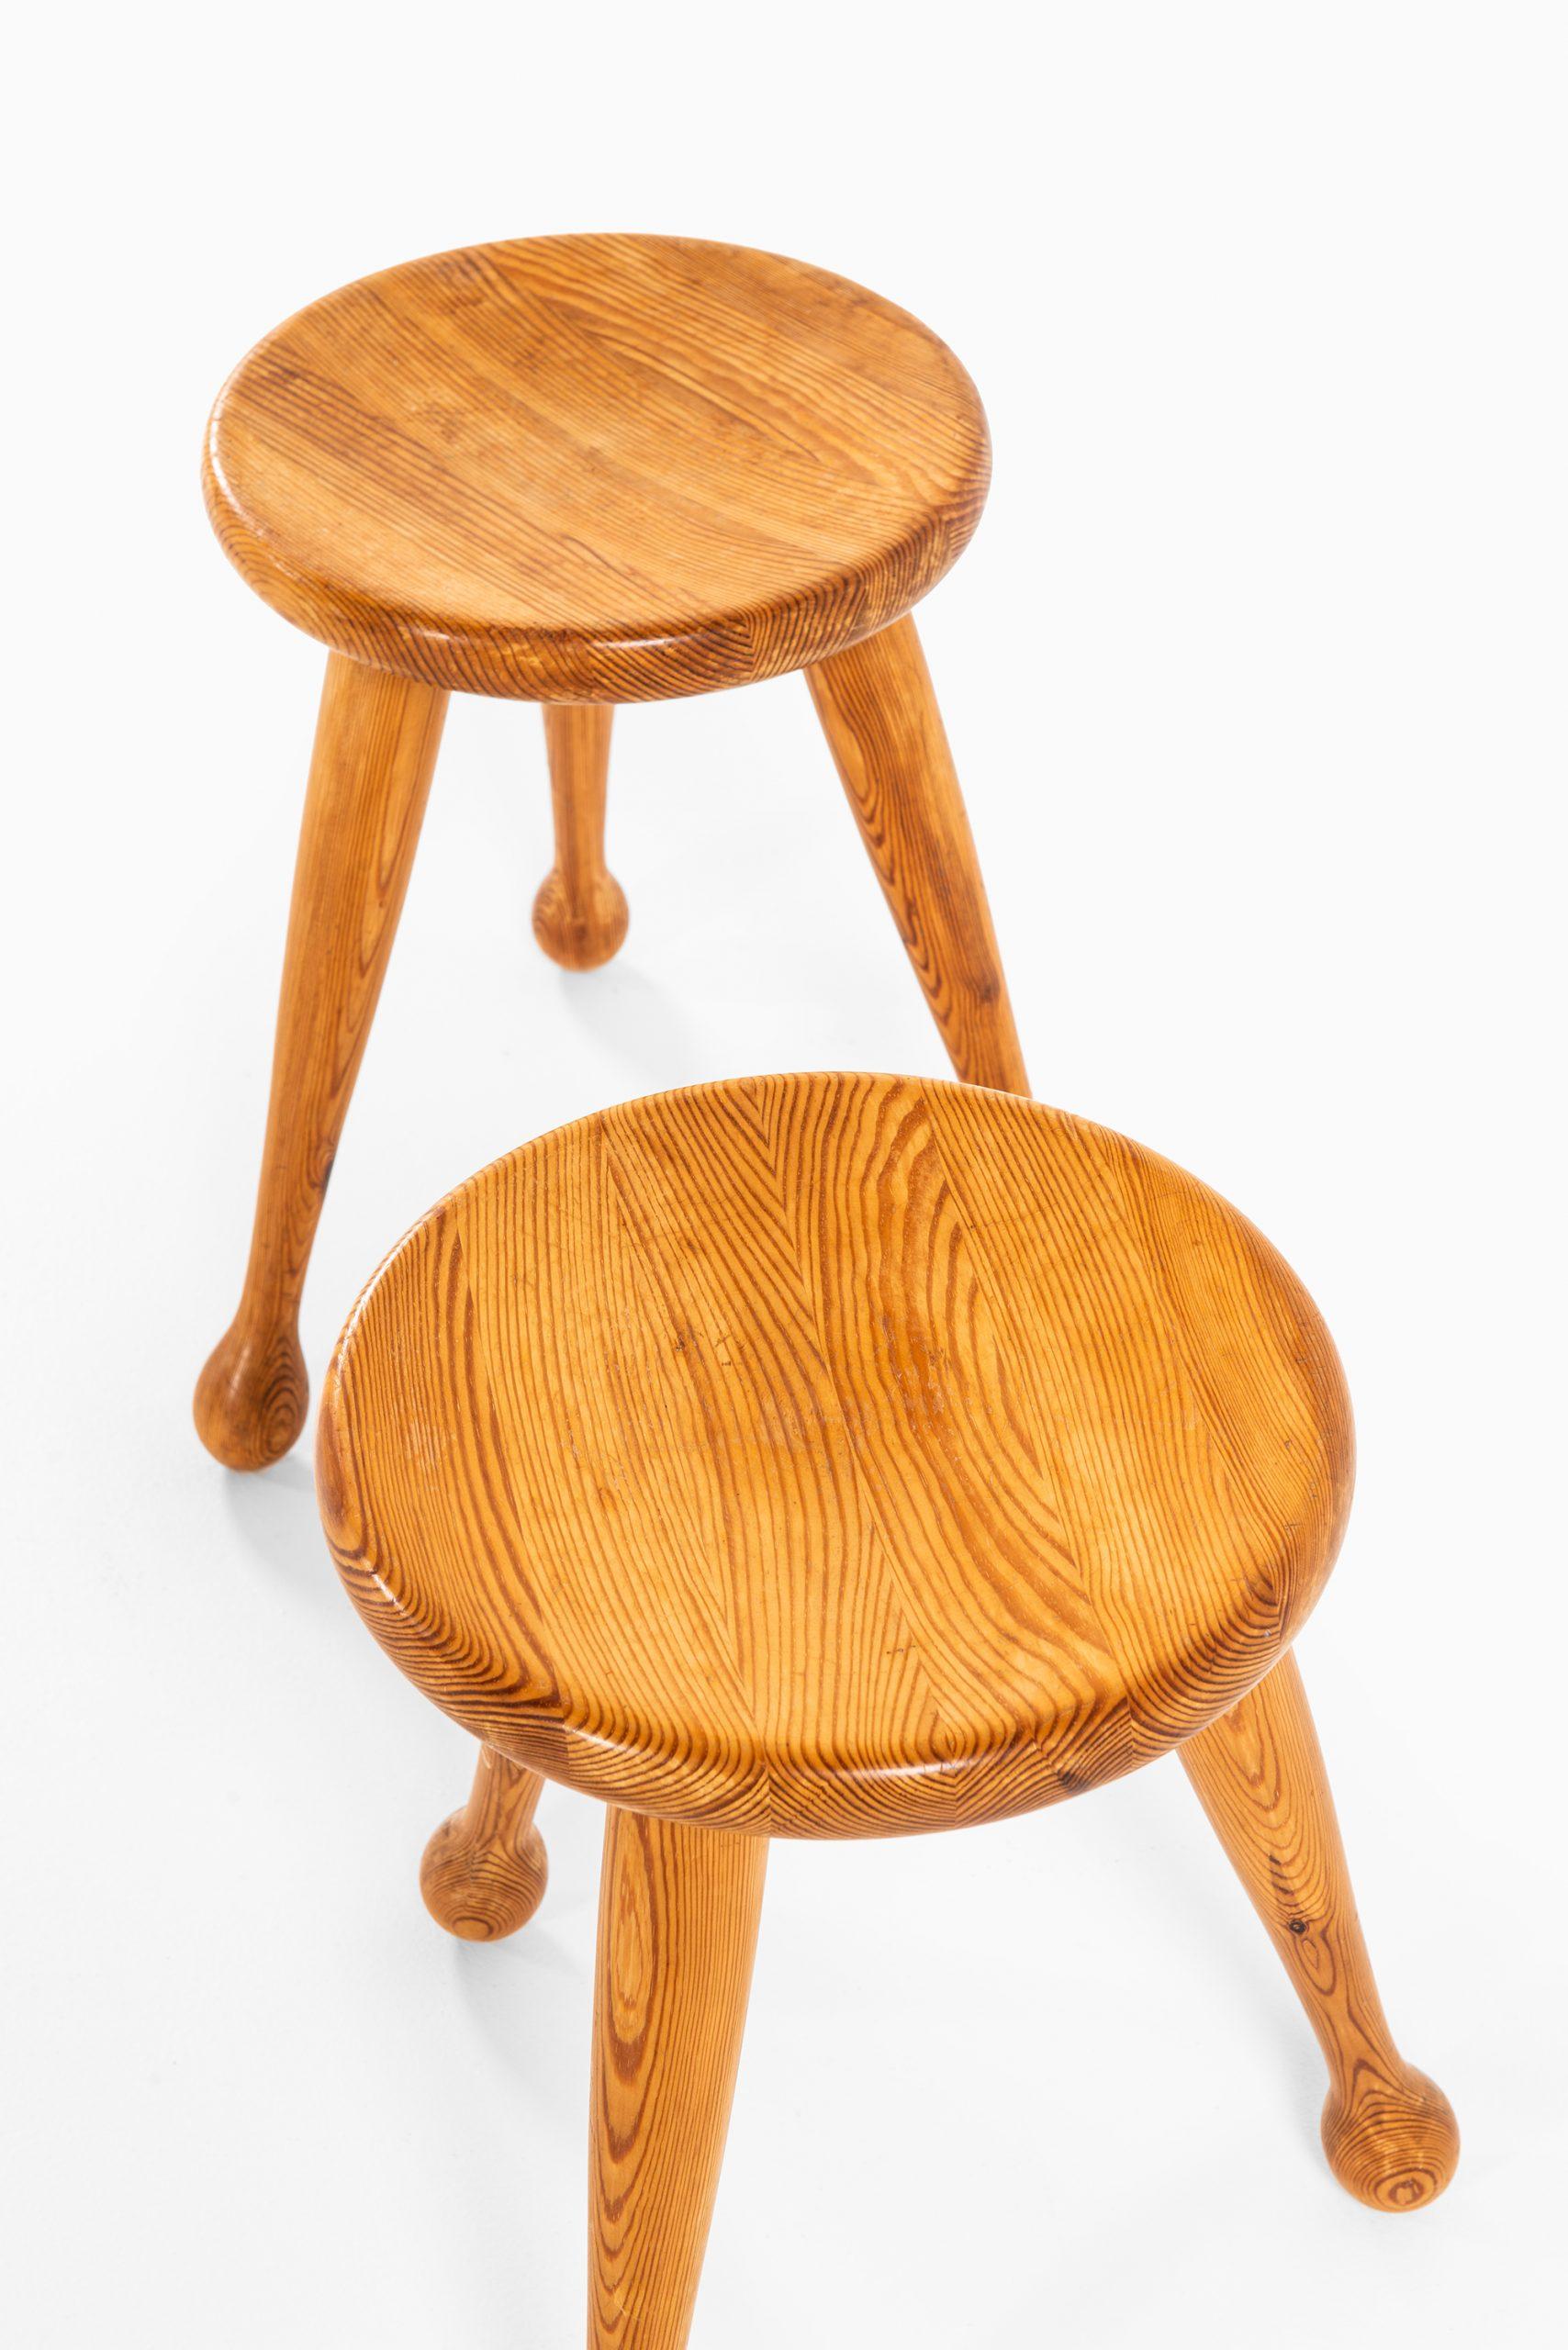 Rare pair of stools by unknown designer. Probably produced in Sweden.